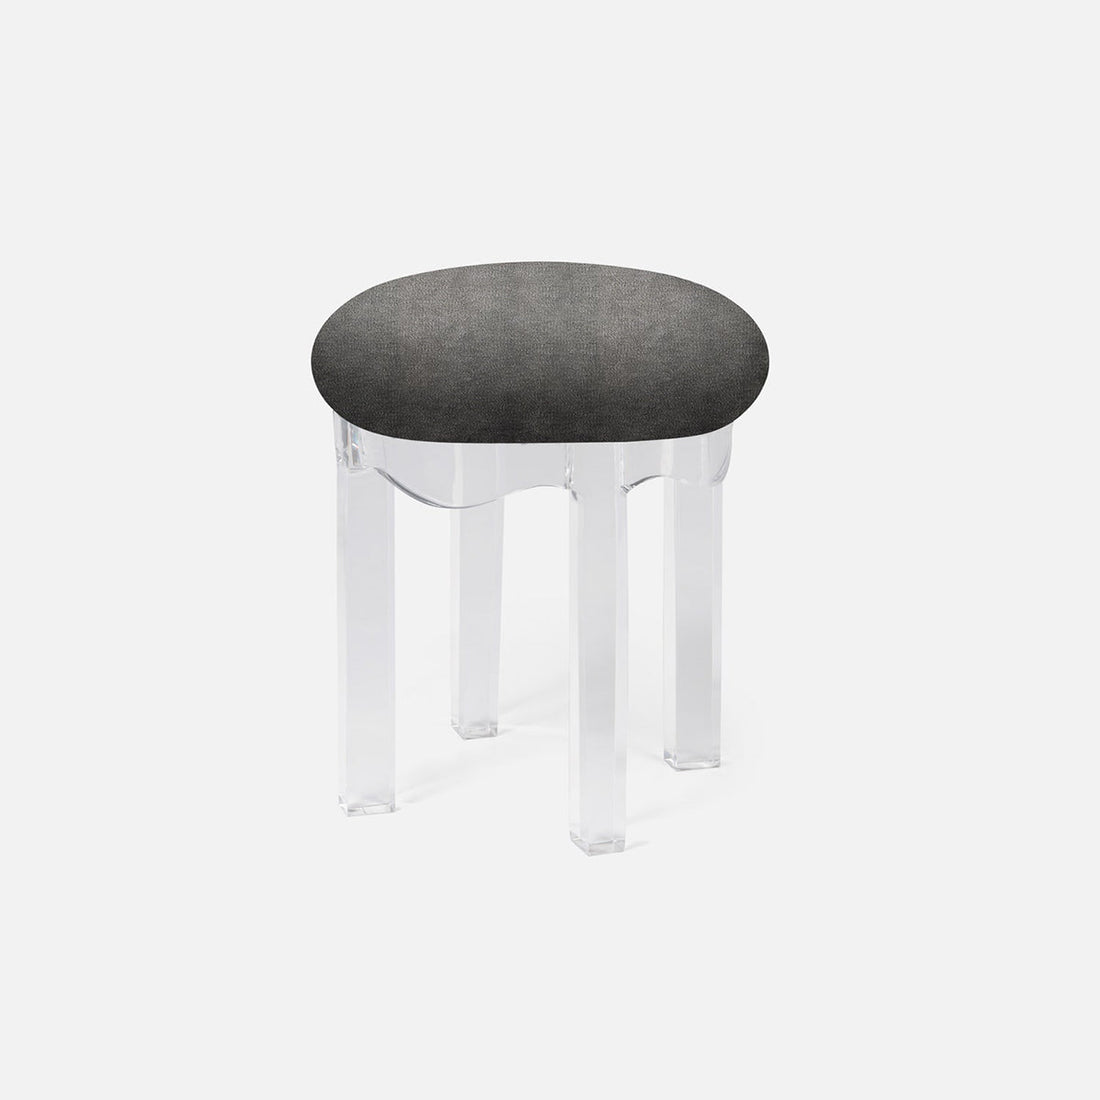 Made Goods Marston Upholstered Round Single Bench in Colorado Leather